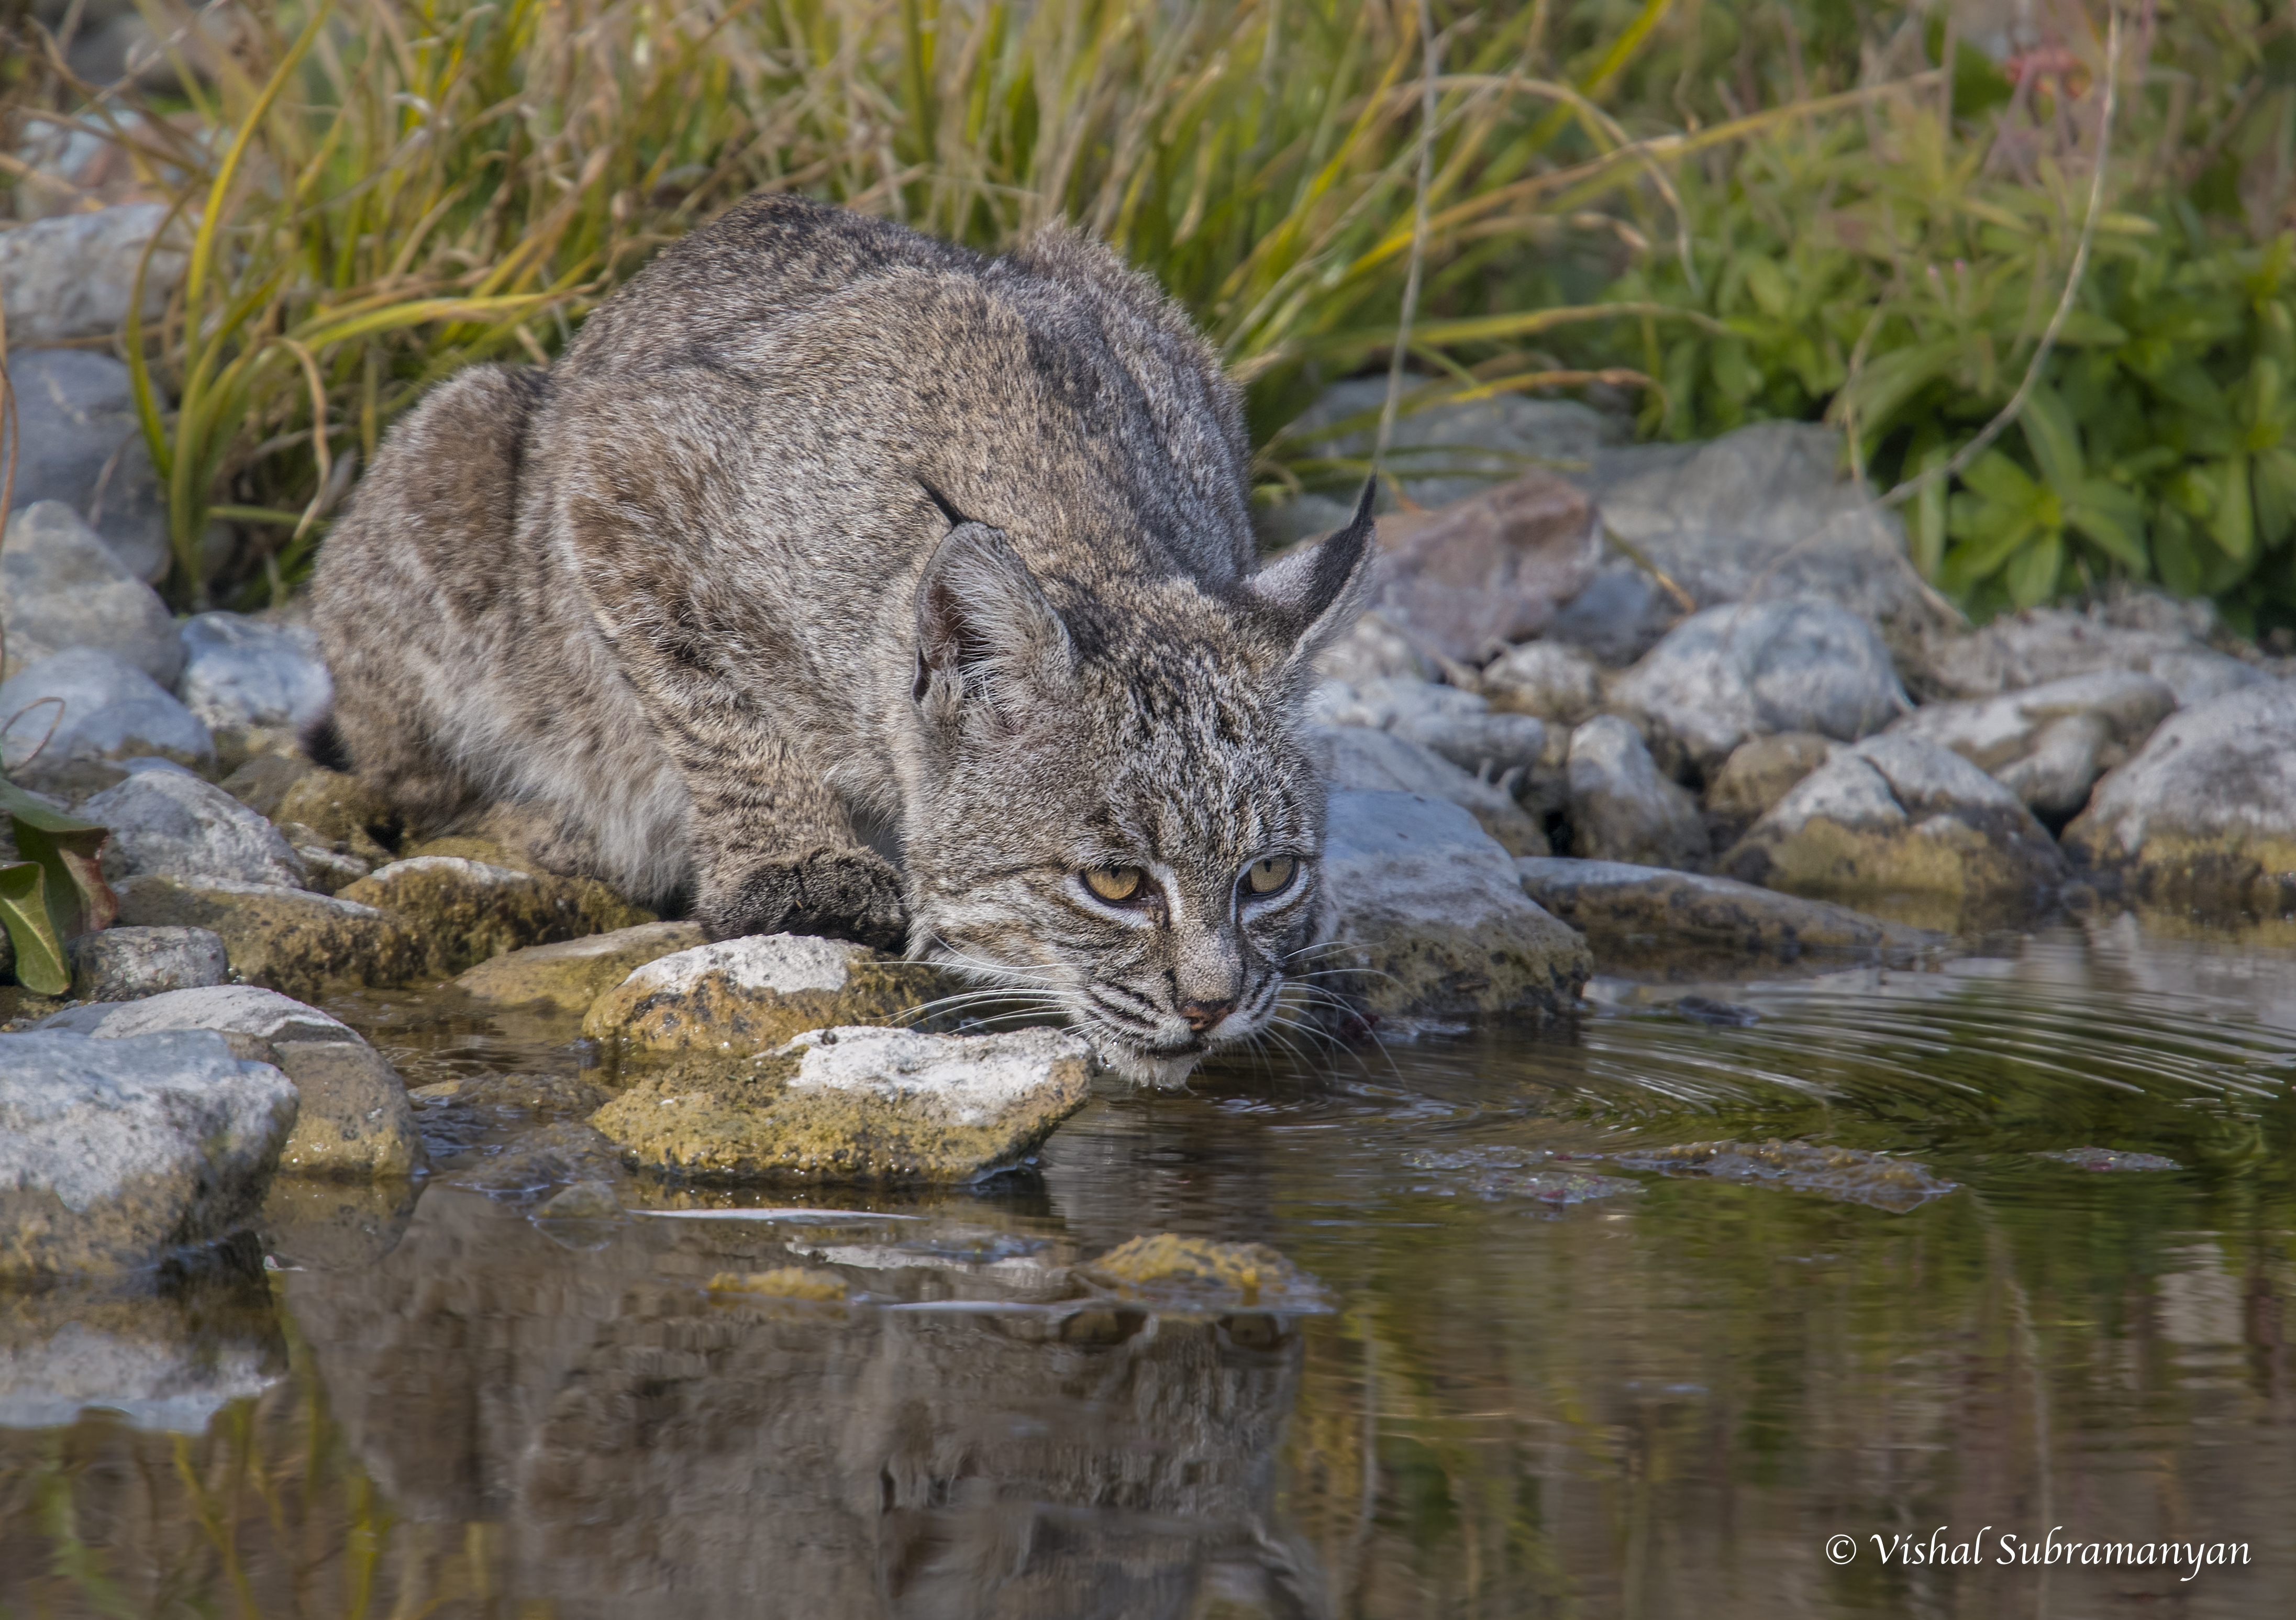 A wild bobcat drinks water from a stream in Sycamore Grove Park.
Nikon d500 with 300mm f4 and 1,4tc, handheld, Iso 400, 1/1250,...